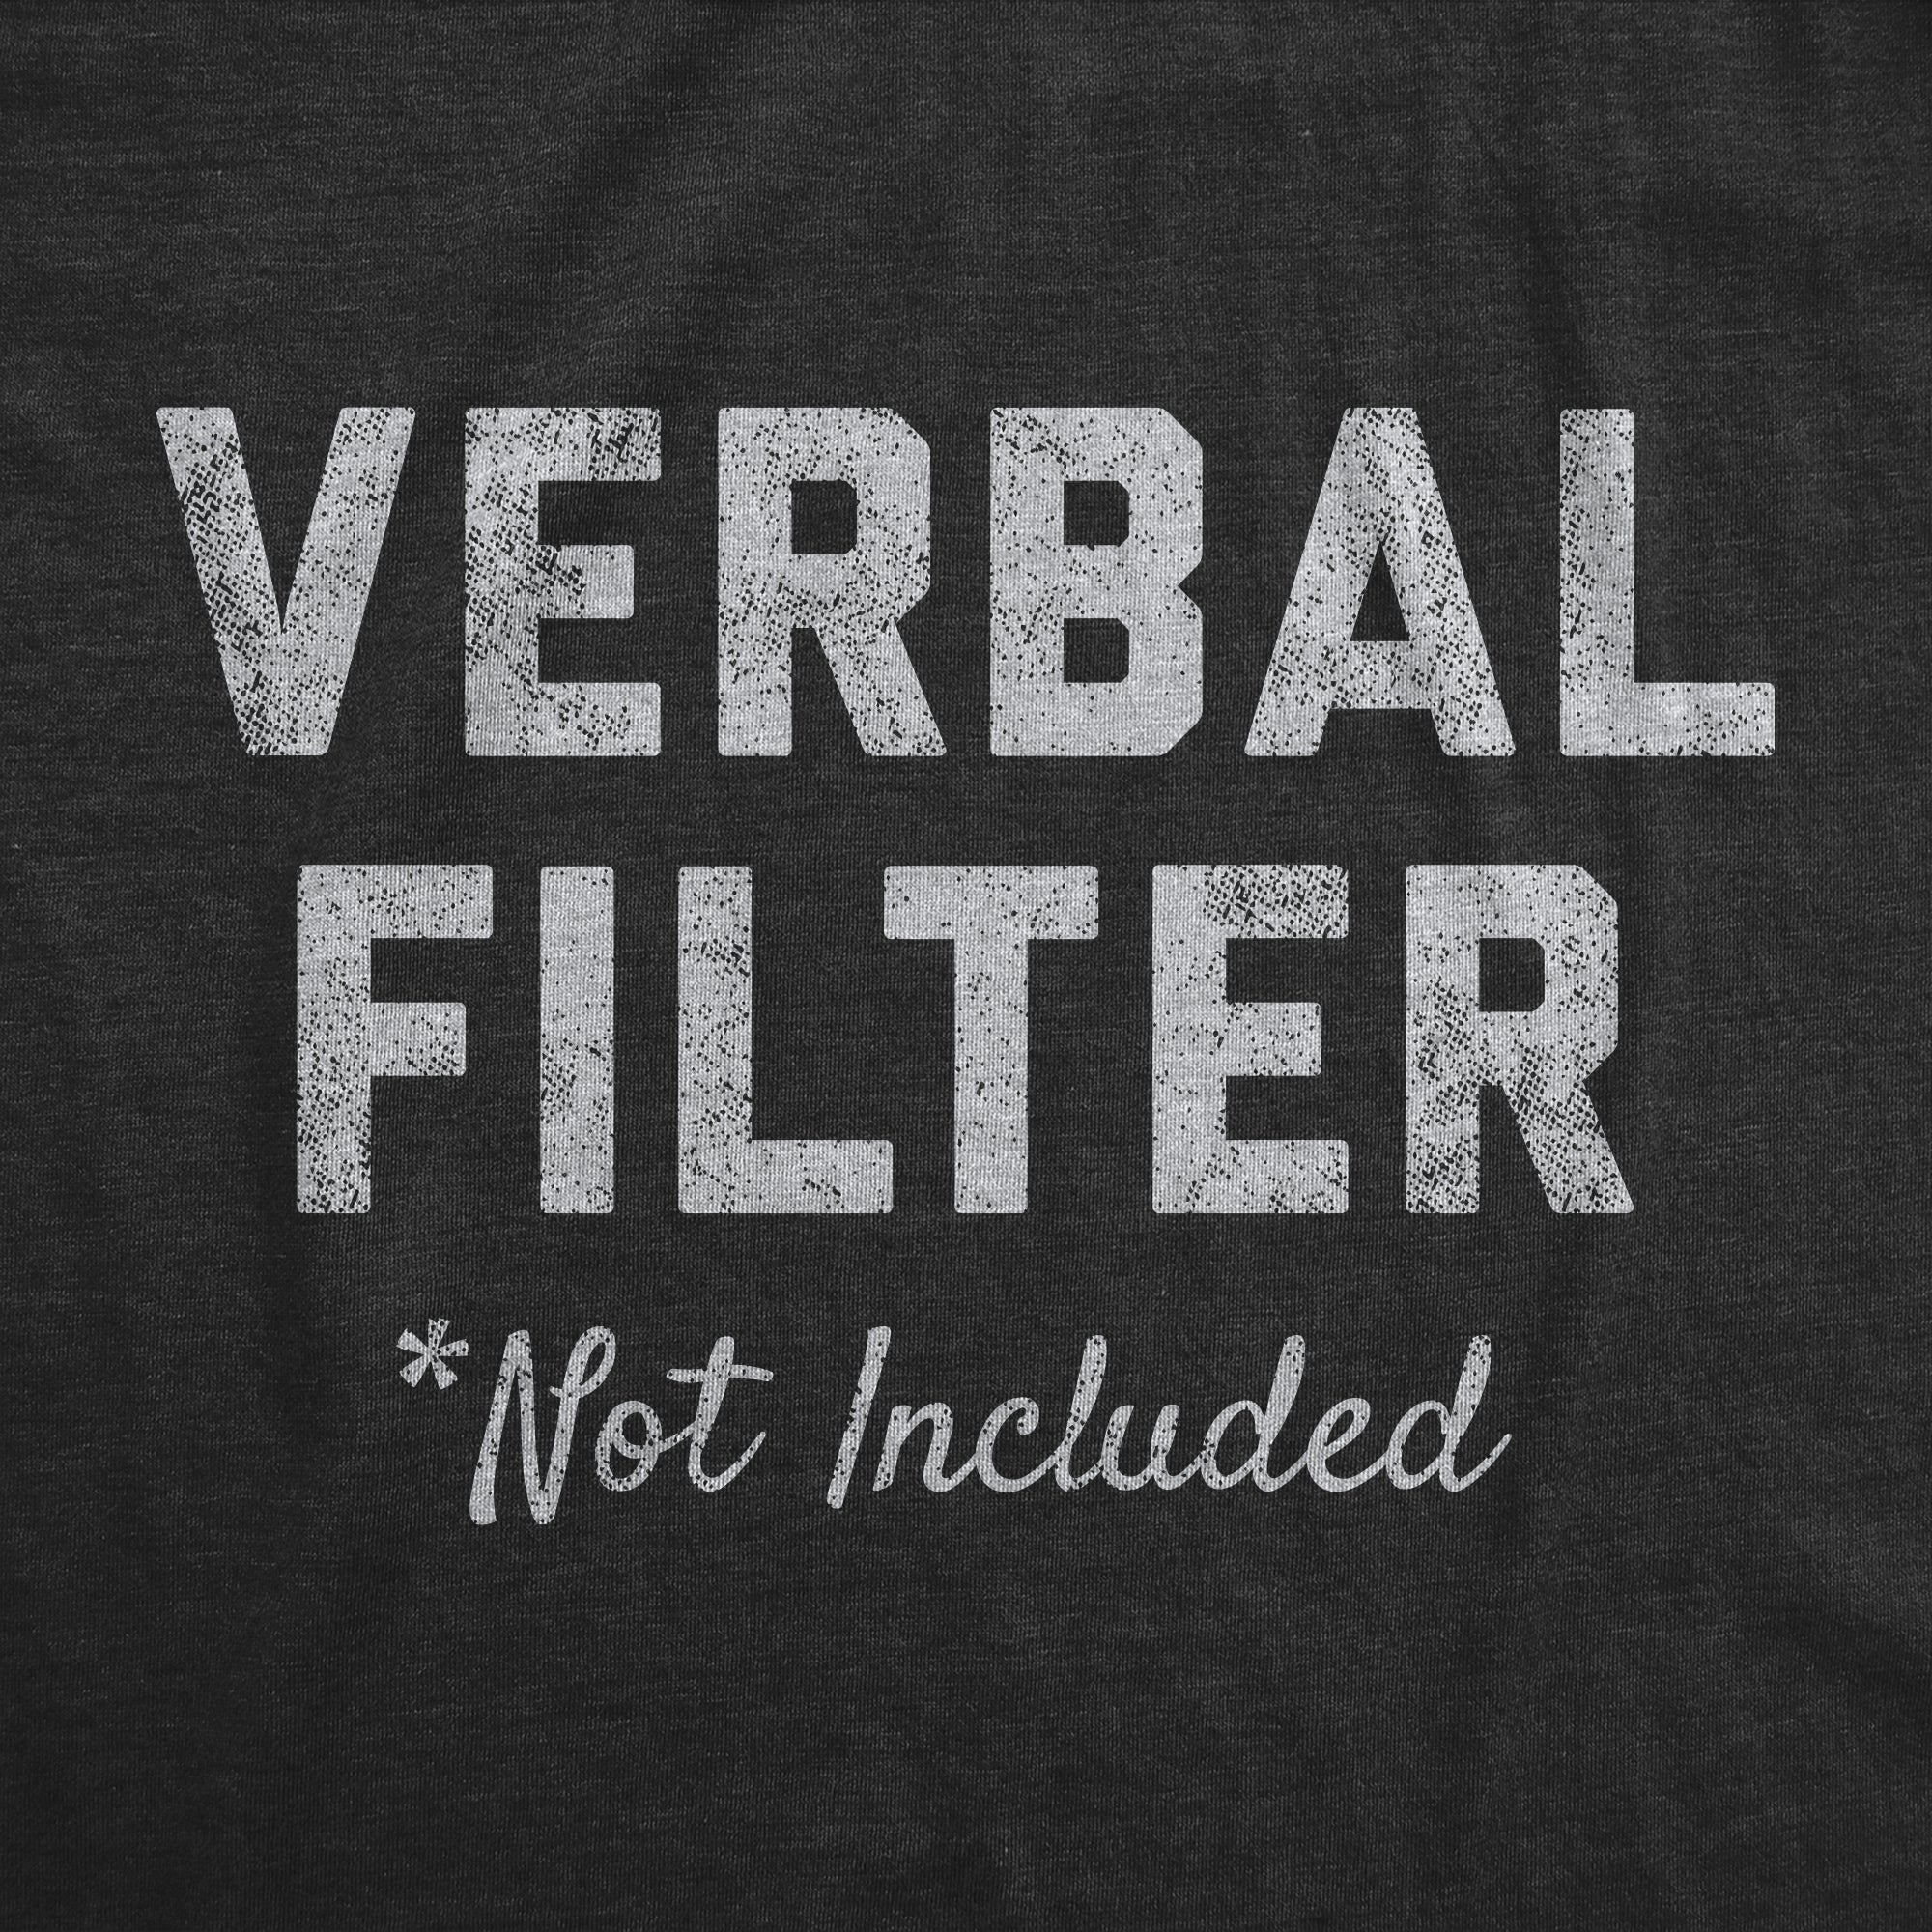 Funny Heather Black - Verbal Filter Verbal Filter Not Included Womens T Shirt Nerdy Sarcastic Tee